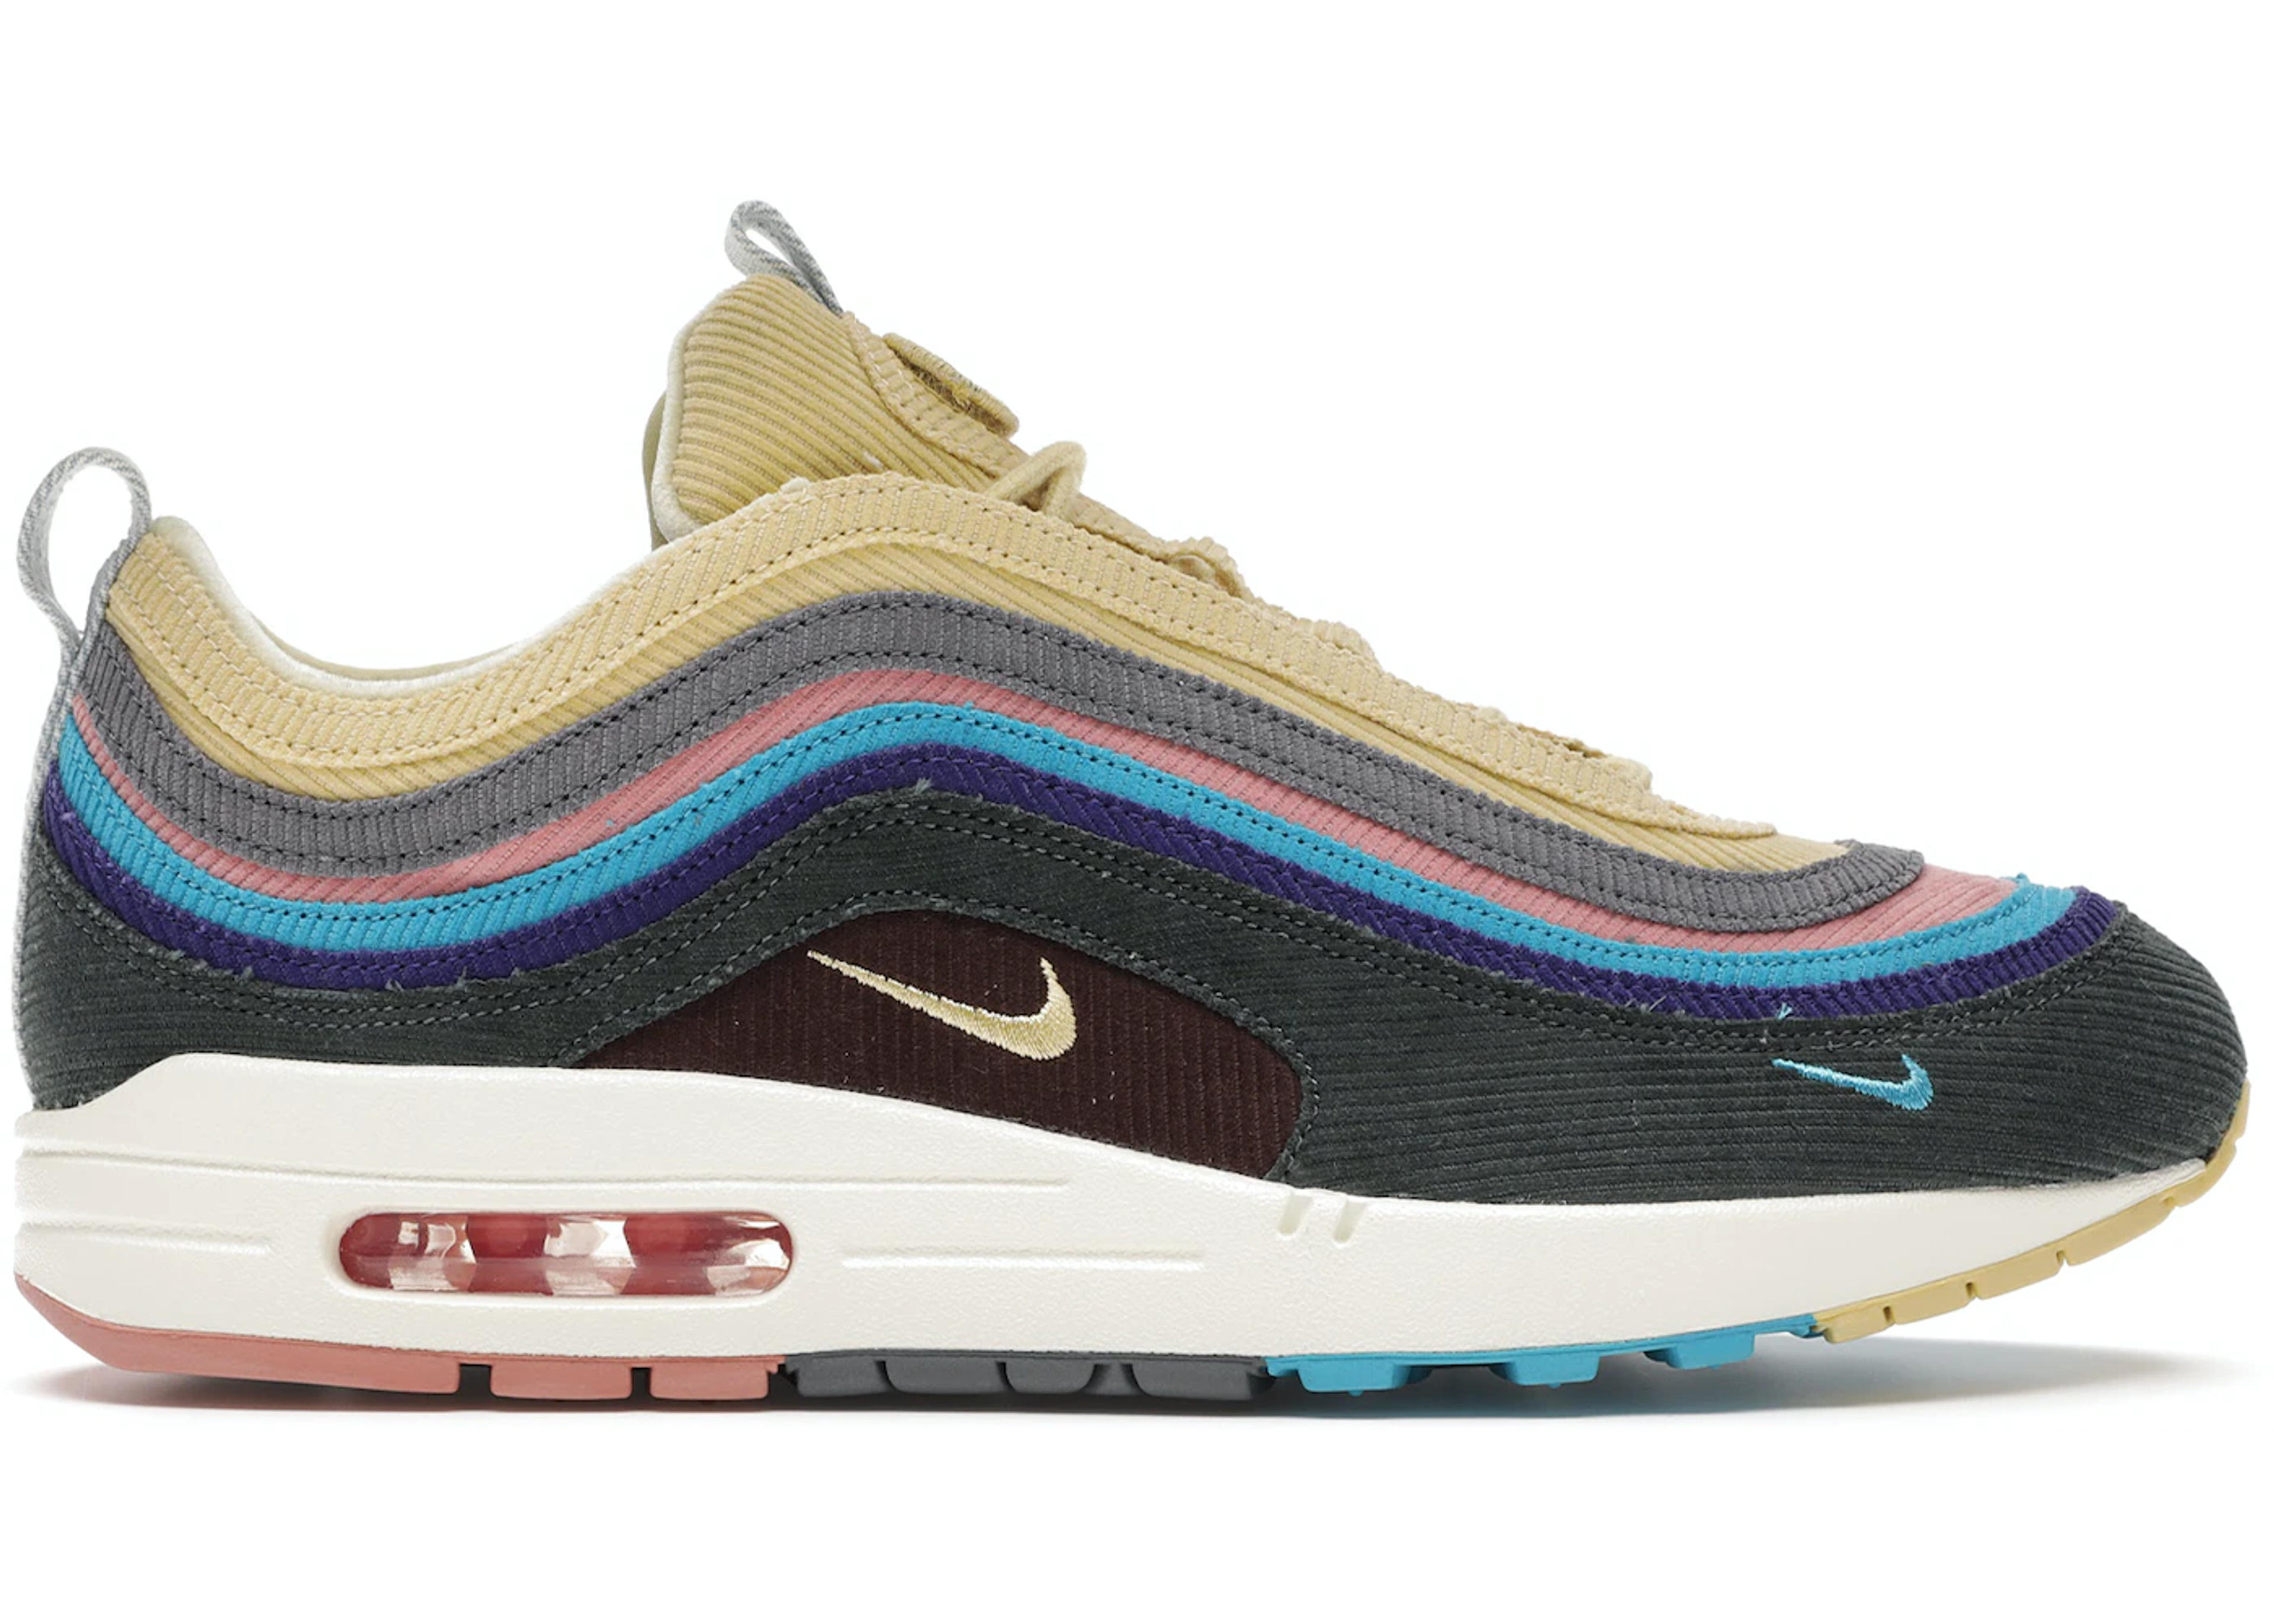 Nike Air Max 1/97 Sean Wotherspoon (All Accessories and Dustbag) - AJ4219-400 - US